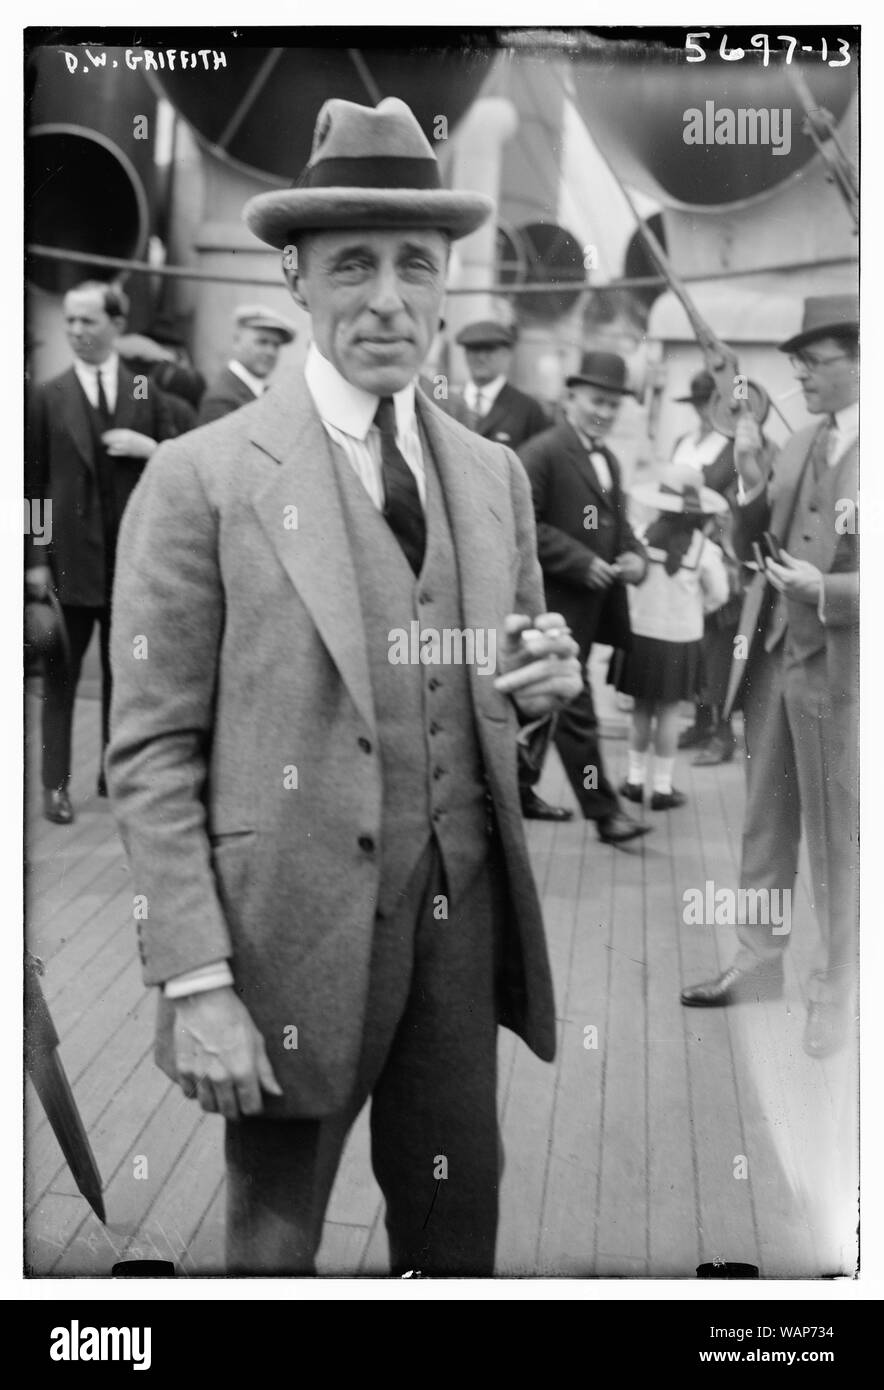 D.W. Griffith Stock Photo